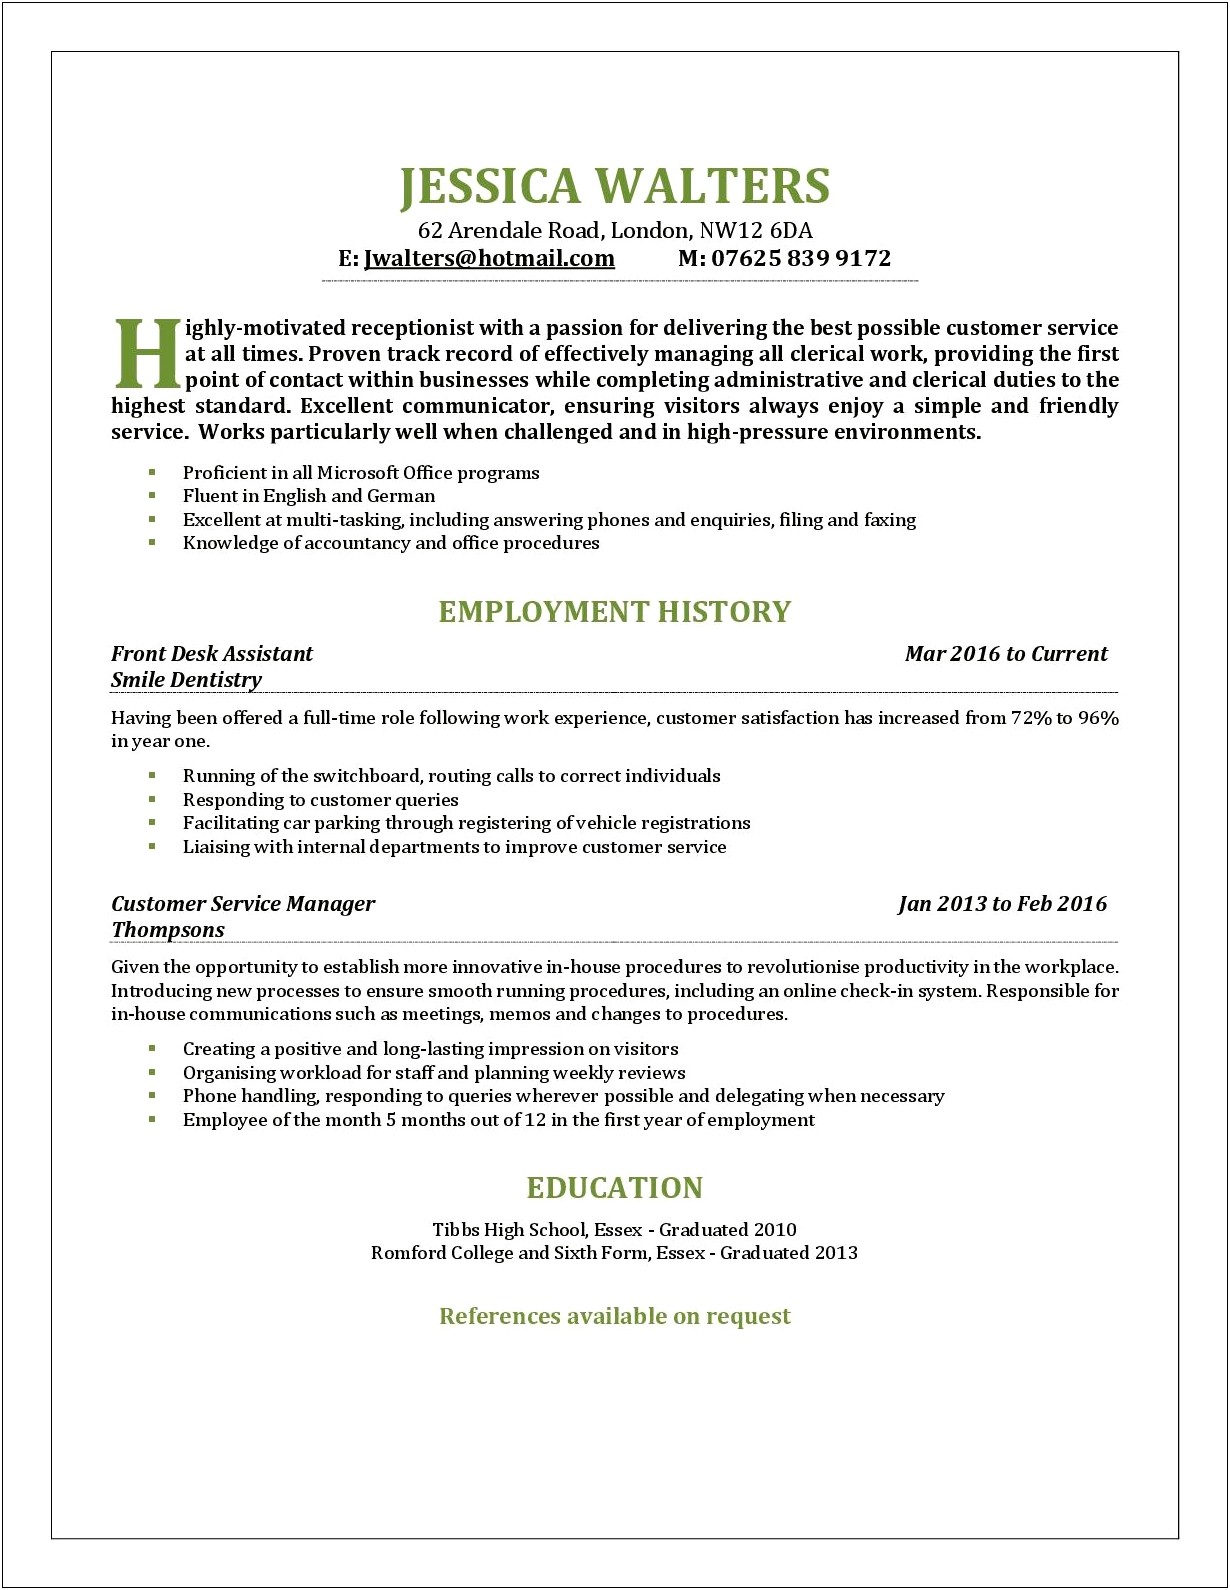 Sample Resume For Dental Receptionist With No Experience